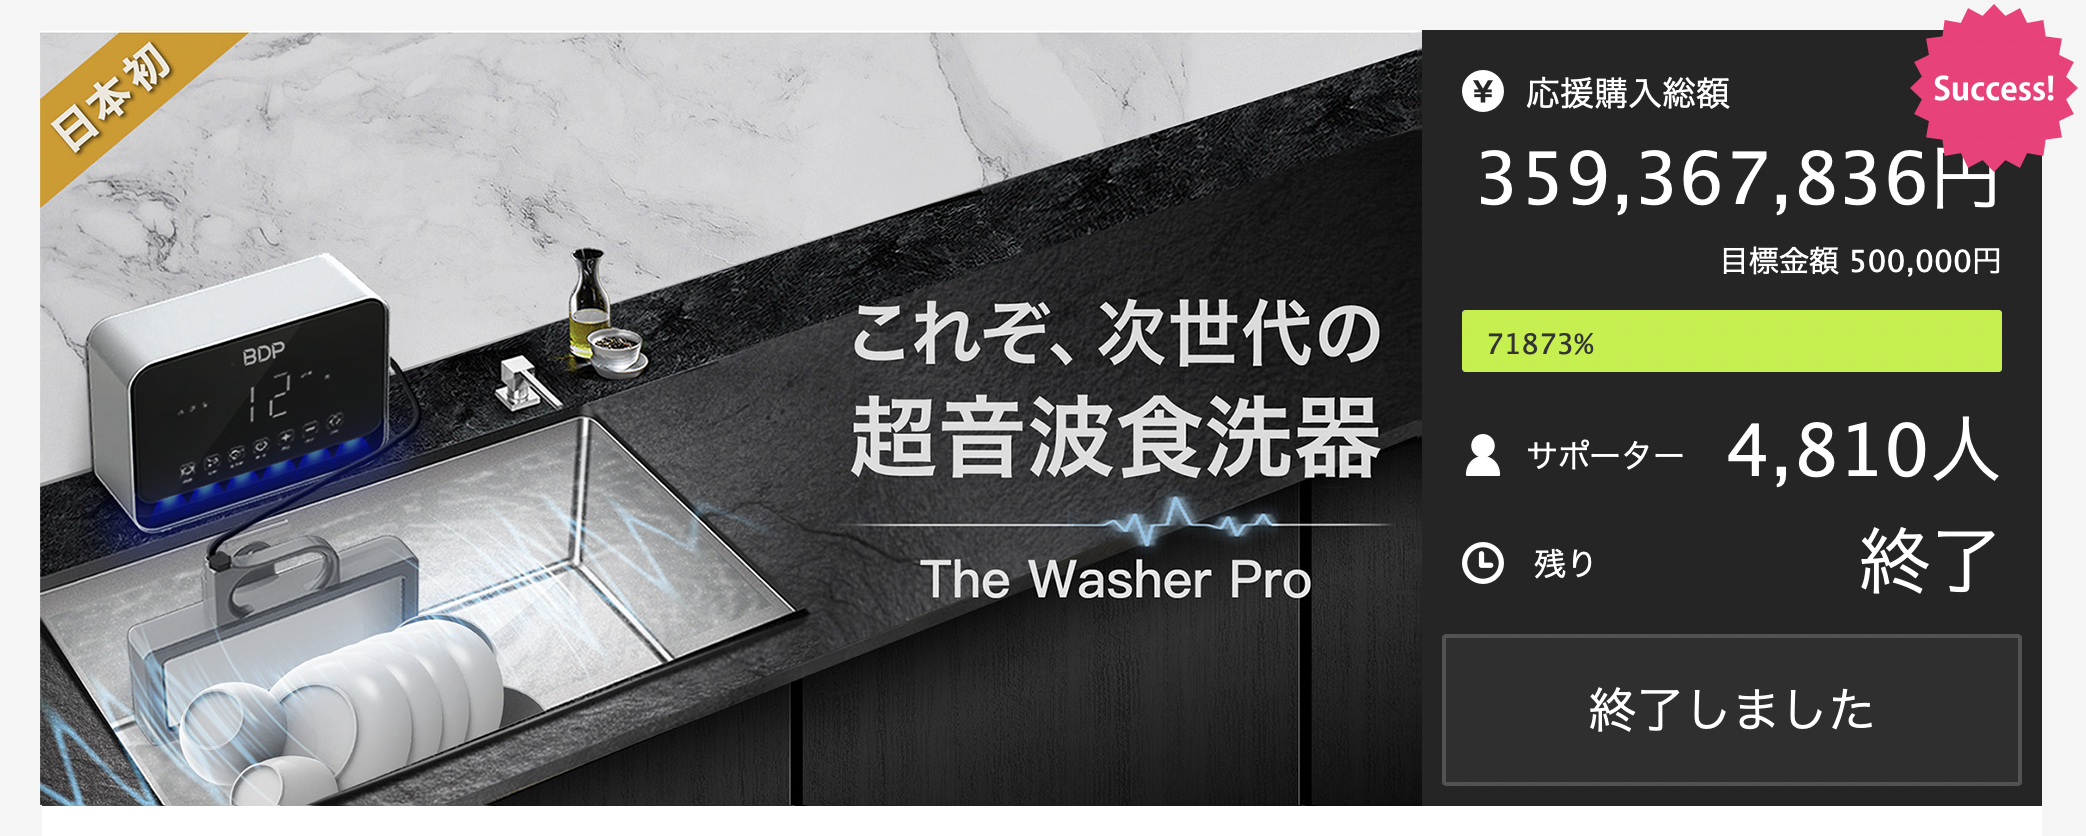 BDP ウォッシャープロ THE Washer Pro 超音波食洗機 - その他